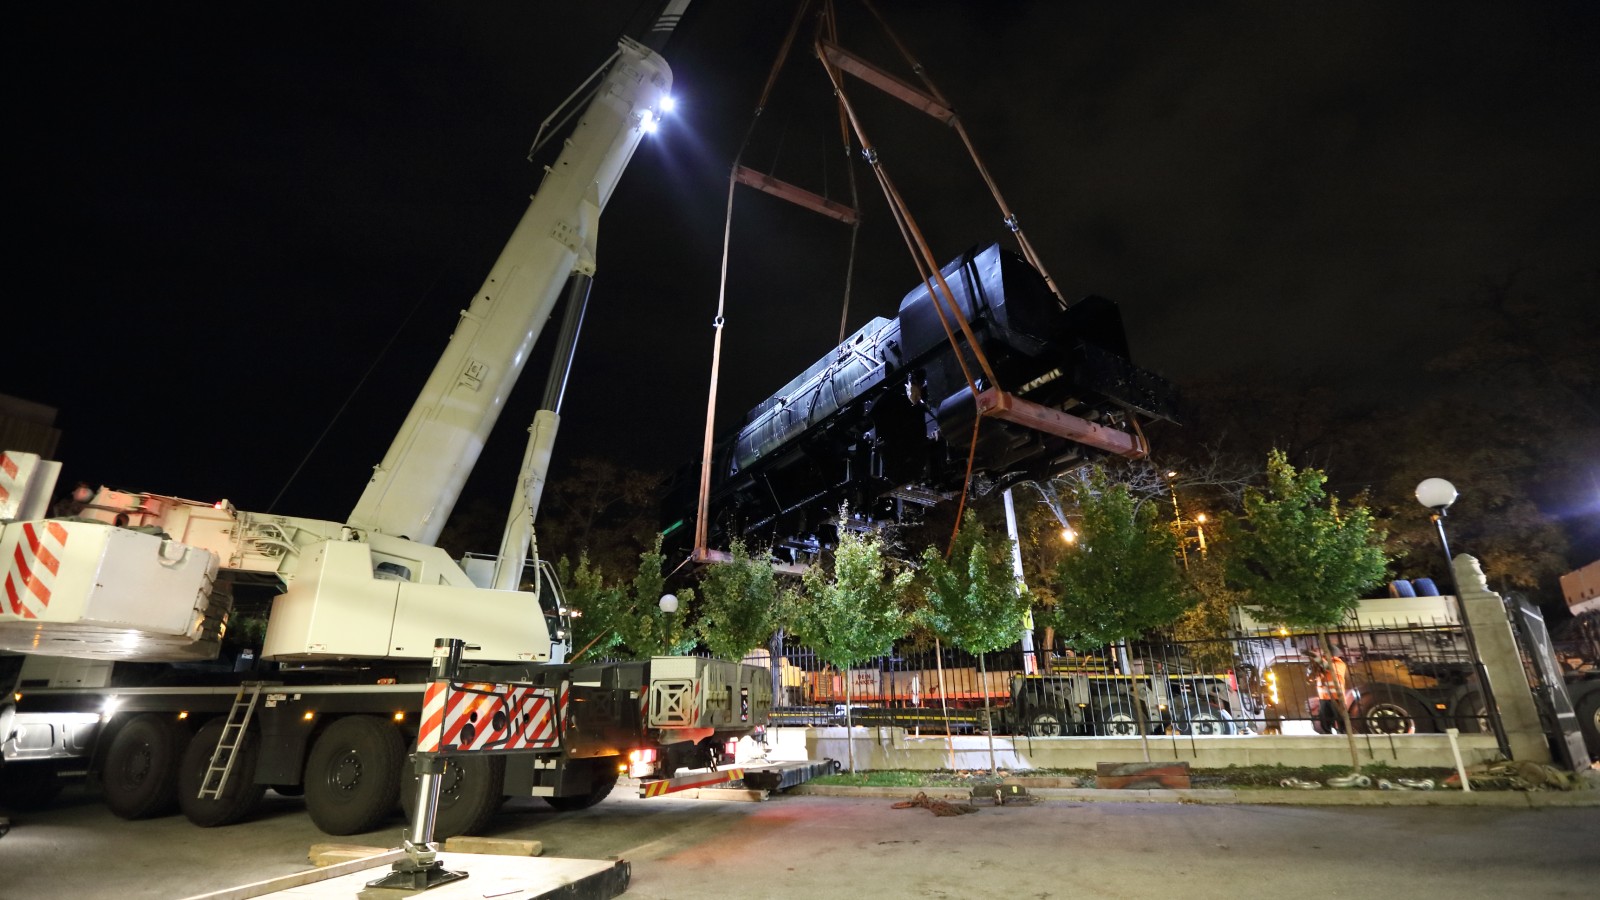 The 12.10 locomotive is lifted over the fence of the Technisches Museum Wien